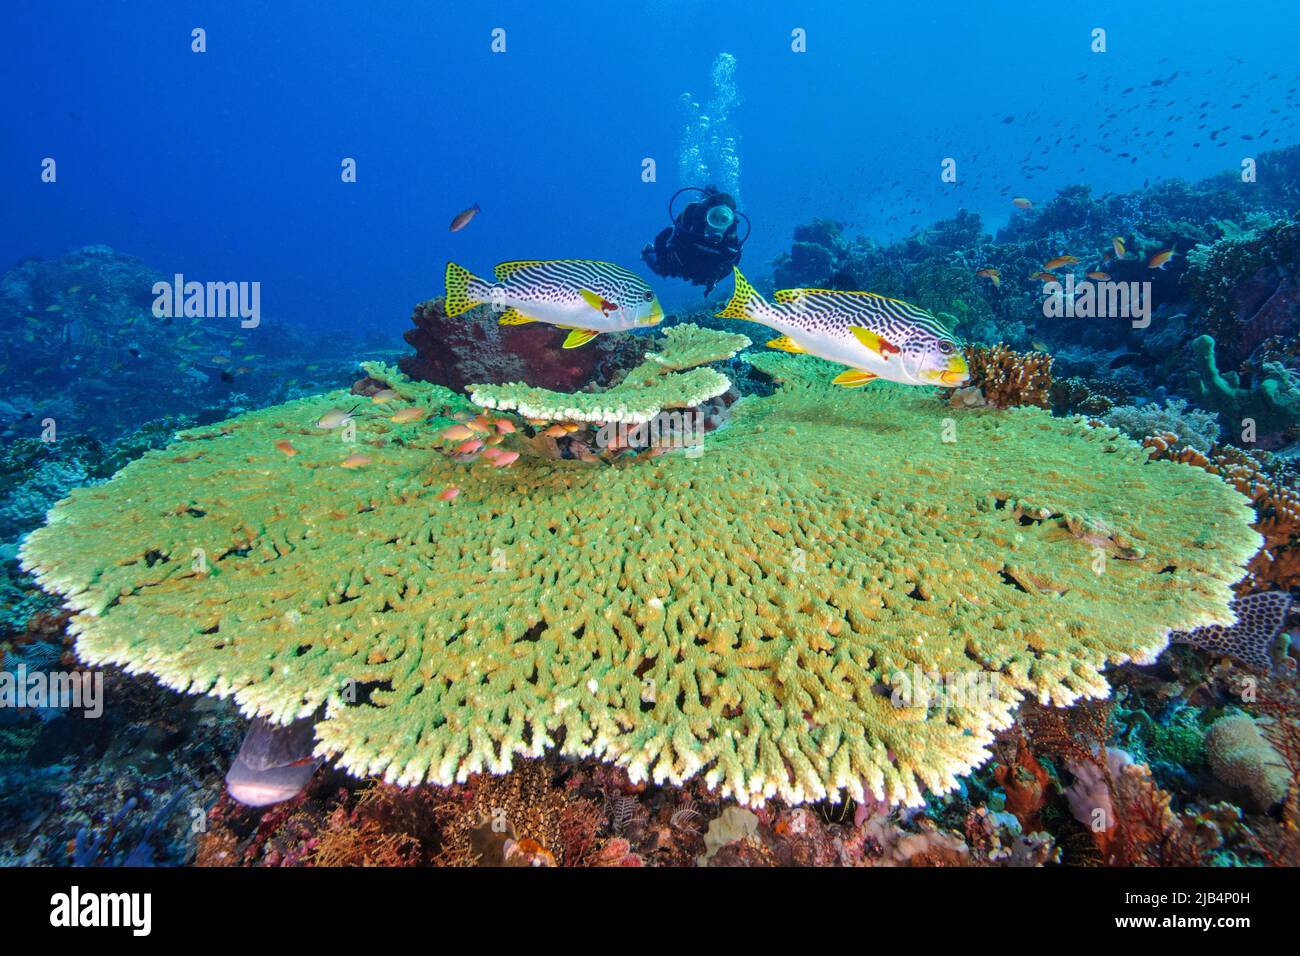 Striped diagonal-banded sweetlip (Plectorhinchus lineatus) swimming over large small polyp stone coral (Acropora clathrata), table coral, diver in Stock Photo